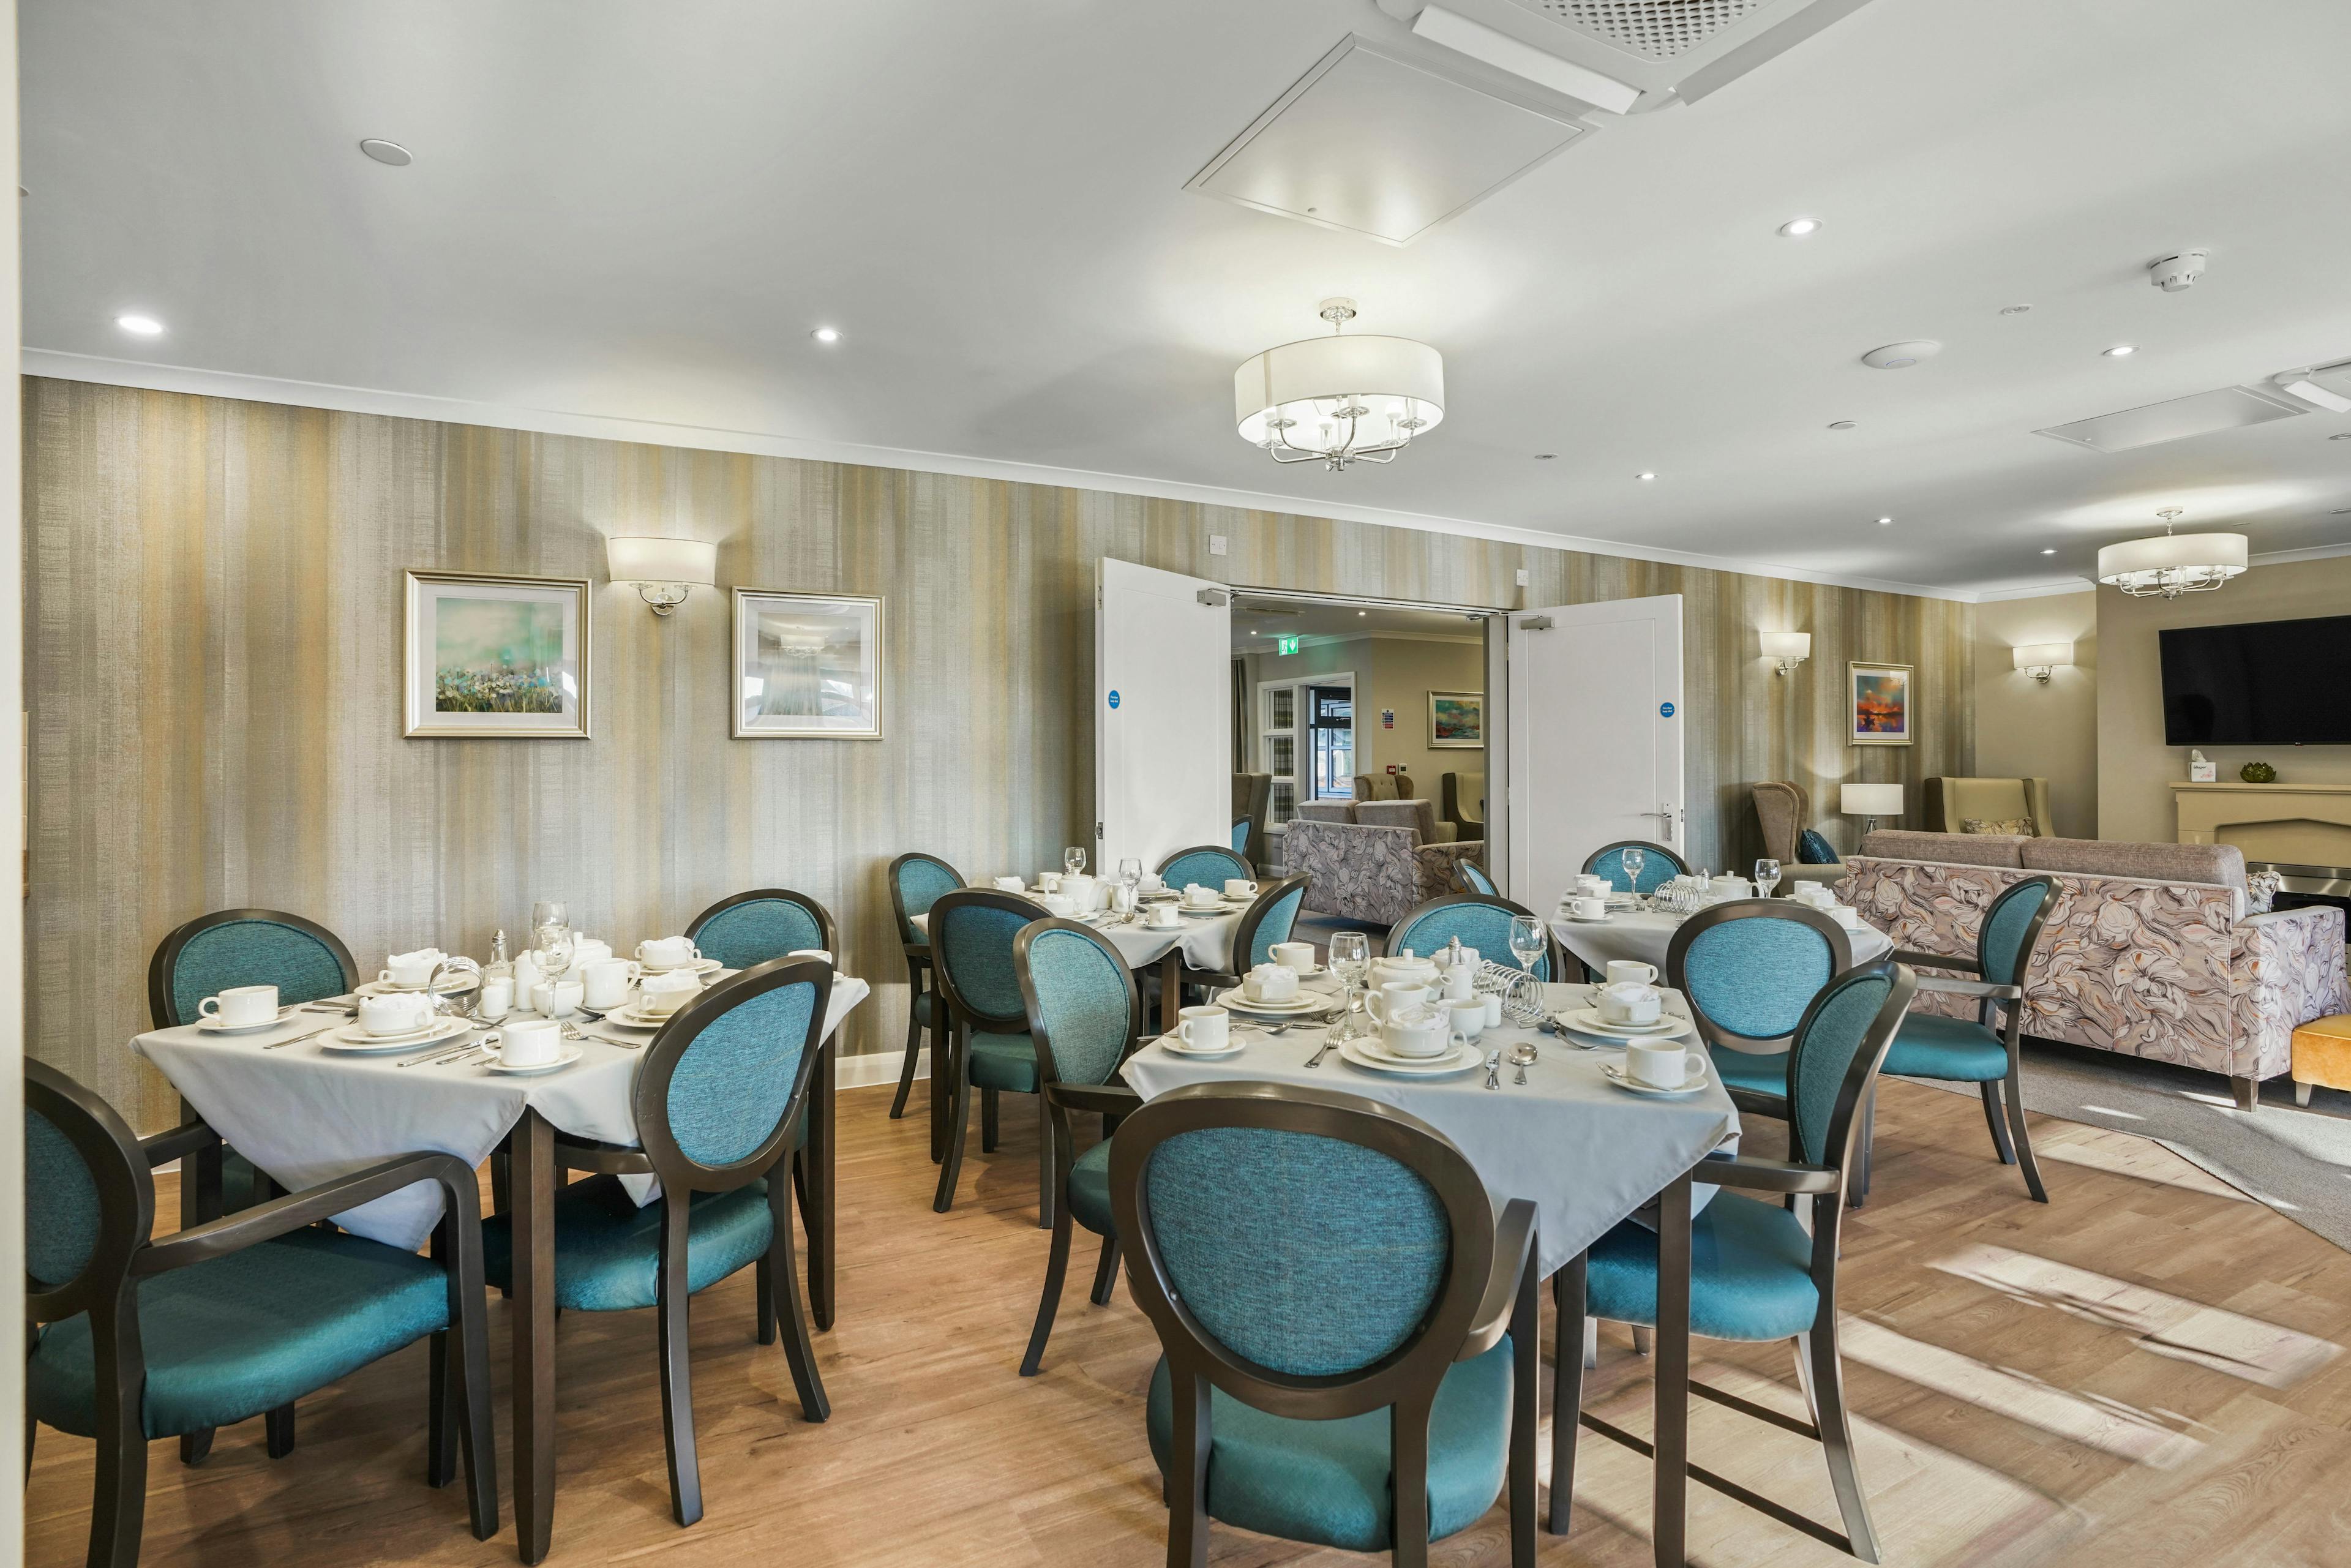 Dining room of Meadows Park care home in Louth, Lincolnshire